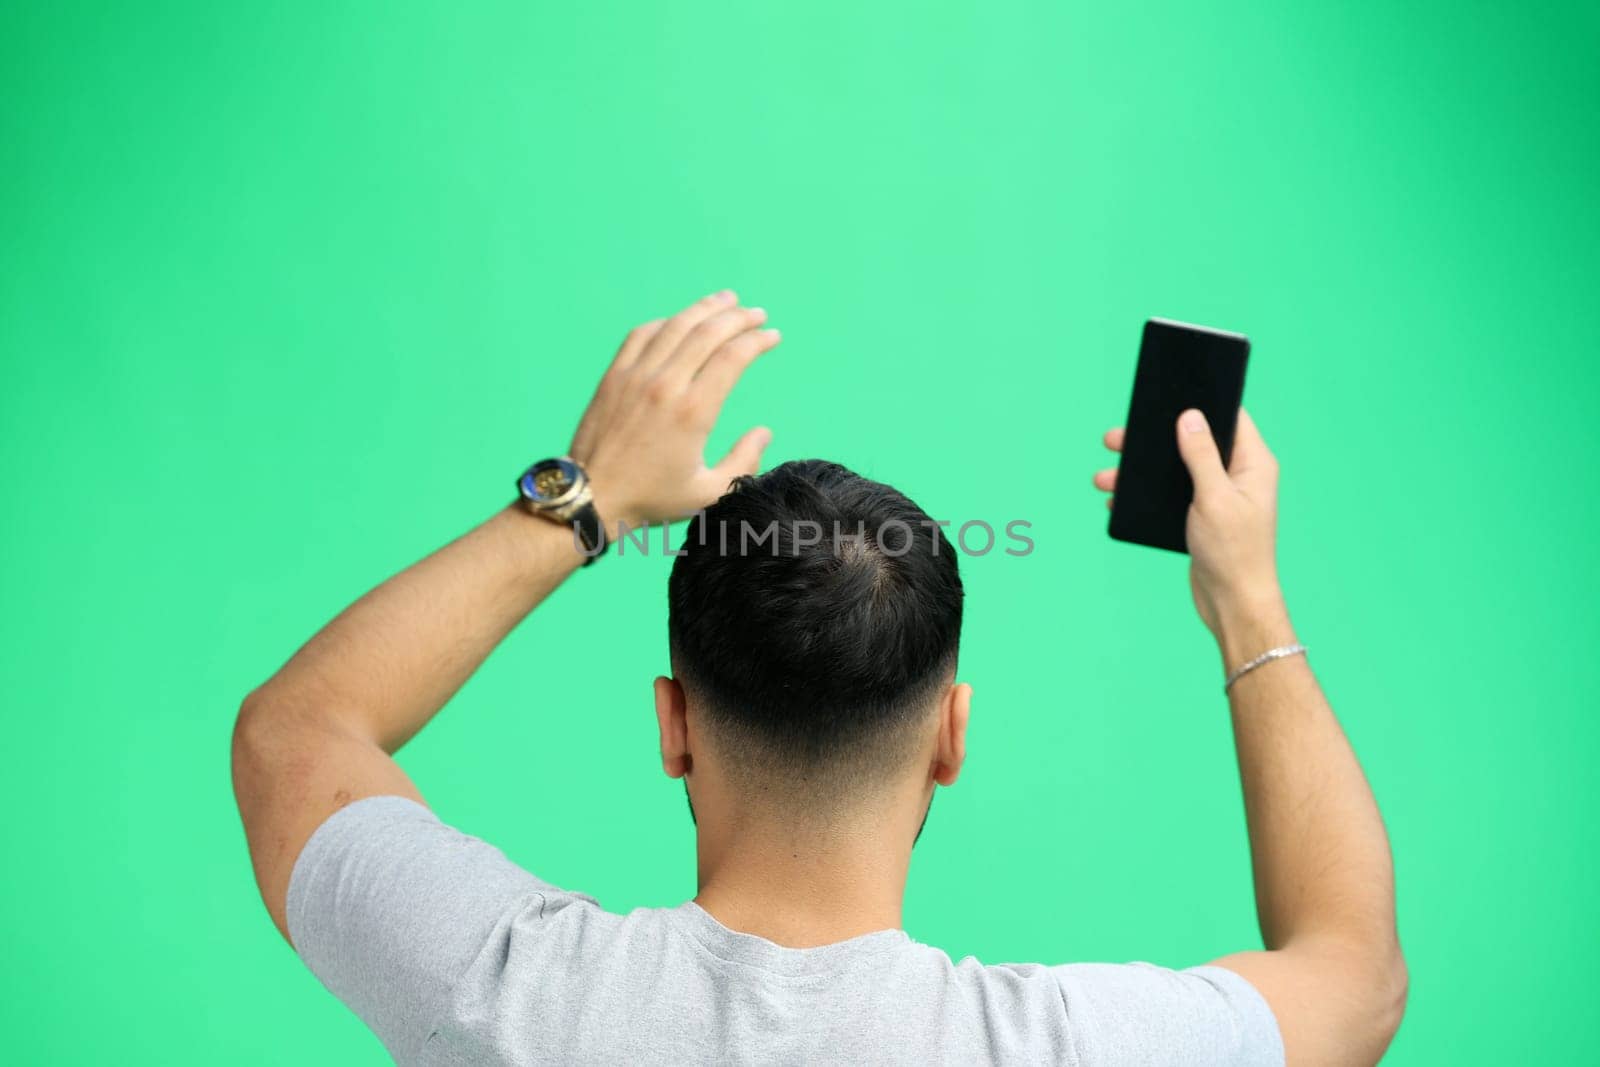 A man, close-up, on a green background, waving his phone.